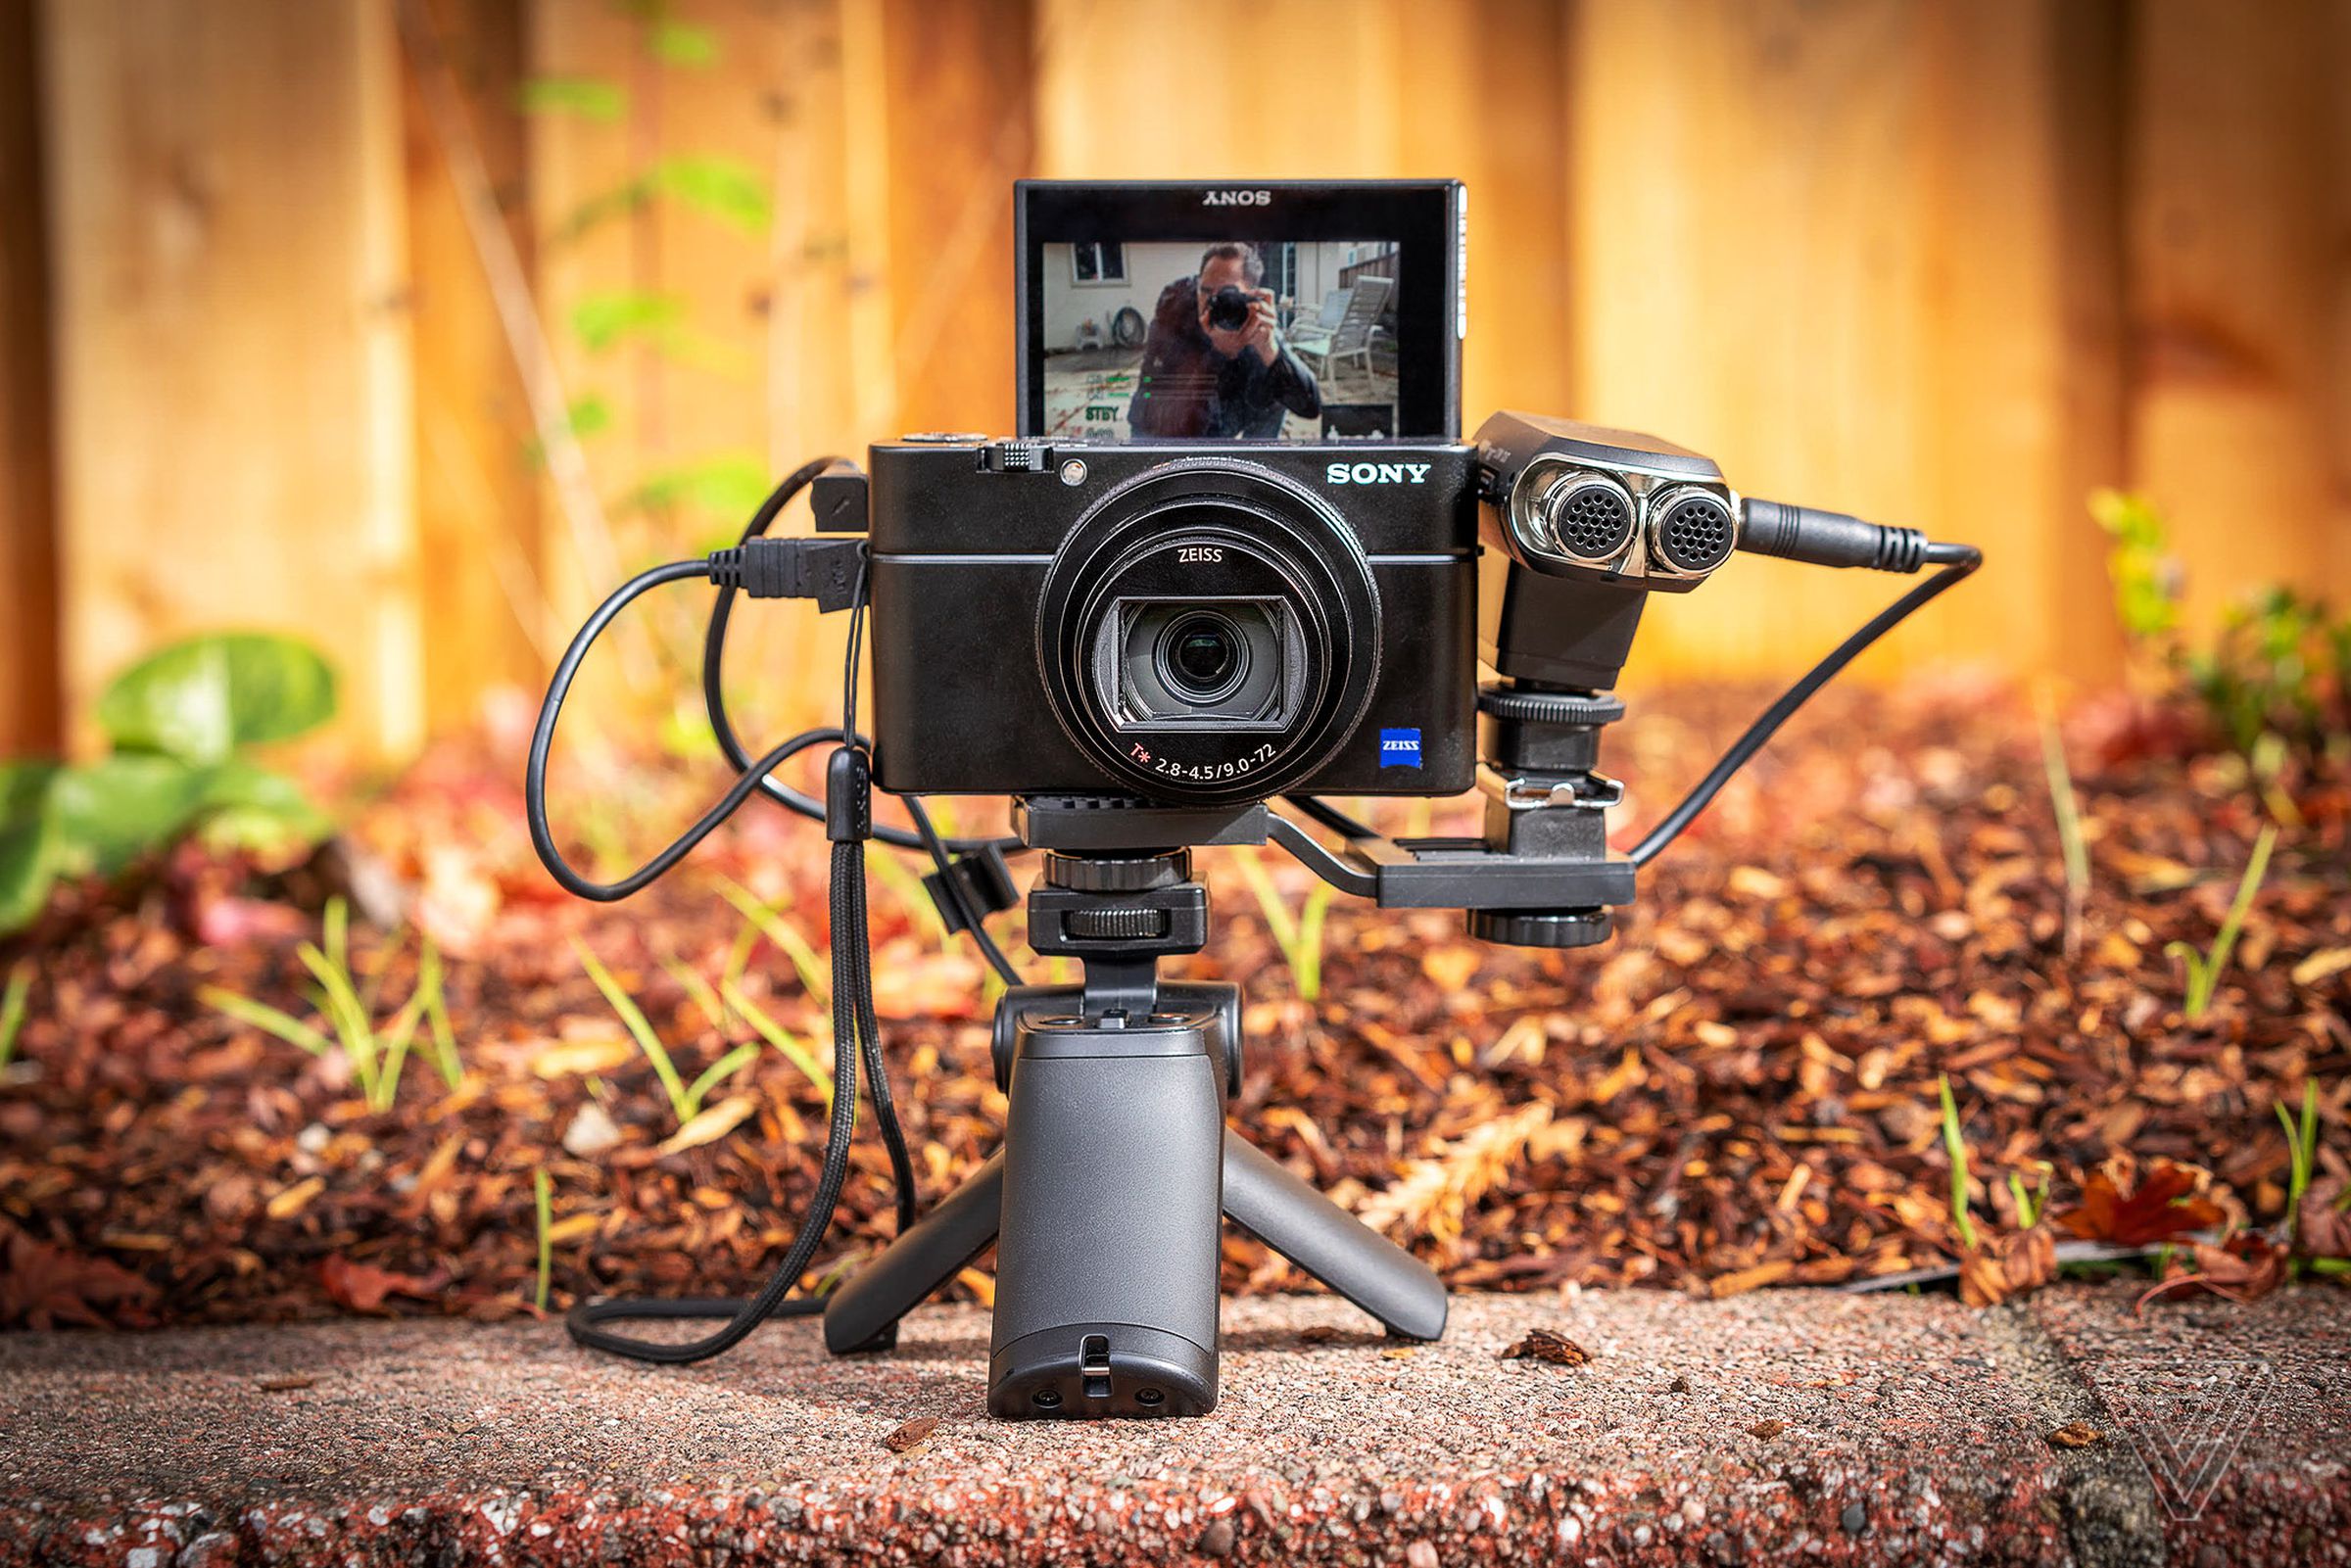 The RX100 Mark VII finally includes a mic jack and a 180-degree flipping screen, but it lacks a shoe to hold the mic and headphone jack to monitor audio.